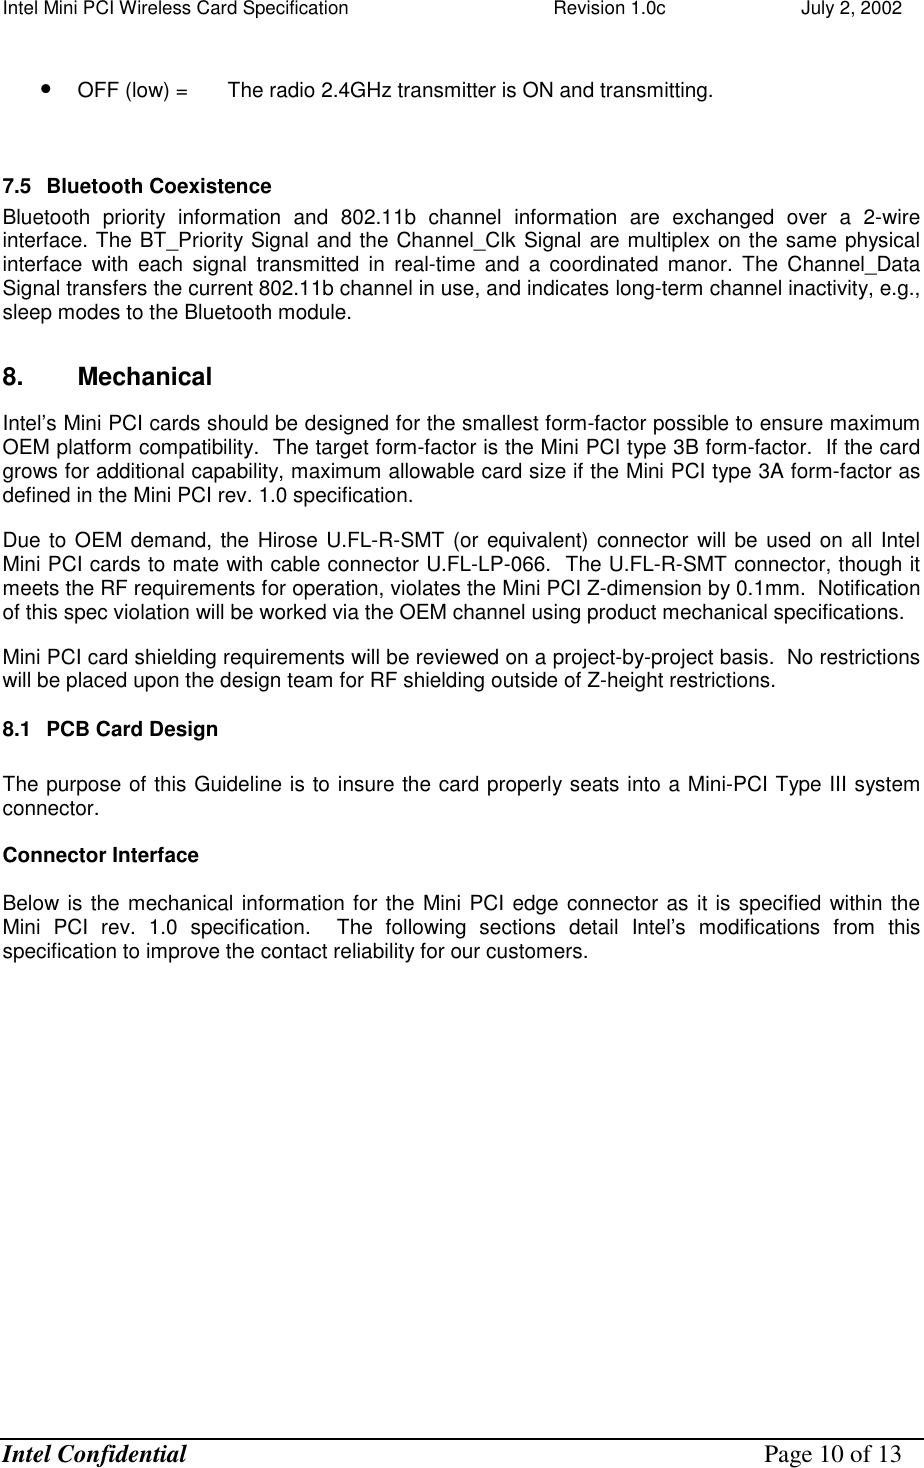 Intel Mini PCI Wireless Card Specification    Revision 1.0c                          July 2, 2002  Intel Confidential    Page 10 of 13  •  OFF (low) =   The radio 2.4GHz transmitter is ON and transmitting.   7.5  Bluetooth Coexistence  Bluetooth priority information and 802.11b channel information are exchanged over a 2-wire interface. The BT_Priority Signal and the Channel_Clk Signal are multiplex on the same physical interface with each signal transmitted in real-time and a coordinated manor. The Channel_Data Signal transfers the current 802.11b channel in use, and indicates long-term channel inactivity, e.g., sleep modes to the Bluetooth module. 8. Mechanical Intel’s Mini PCI cards should be designed for the smallest form-factor possible to ensure maximum OEM platform compatibility.  The target form-factor is the Mini PCI type 3B form-factor.  If the card grows for additional capability, maximum allowable card size if the Mini PCI type 3A form-factor as defined in the Mini PCI rev. 1.0 specification.   Due to OEM demand, the Hirose U.FL-R-SMT (or equivalent) connector will be used on all Intel Mini PCI cards to mate with cable connector U.FL-LP-066.  The U.FL-R-SMT connector, though it meets the RF requirements for operation, violates the Mini PCI Z-dimension by 0.1mm.  Notification of this spec violation will be worked via the OEM channel using product mechanical specifications. Mini PCI card shielding requirements will be reviewed on a project-by-project basis.  No restrictions will be placed upon the design team for RF shielding outside of Z-height restrictions. 8.1  PCB Card Design   The purpose of this Guideline is to insure the card properly seats into a Mini-PCI Type III system connector.  Connector Interface  Below is the mechanical information for the Mini PCI edge connector as it is specified within the Mini PCI rev. 1.0 specification.  The following sections detail Intel’s modifications from this specification to improve the contact reliability for our customers.    